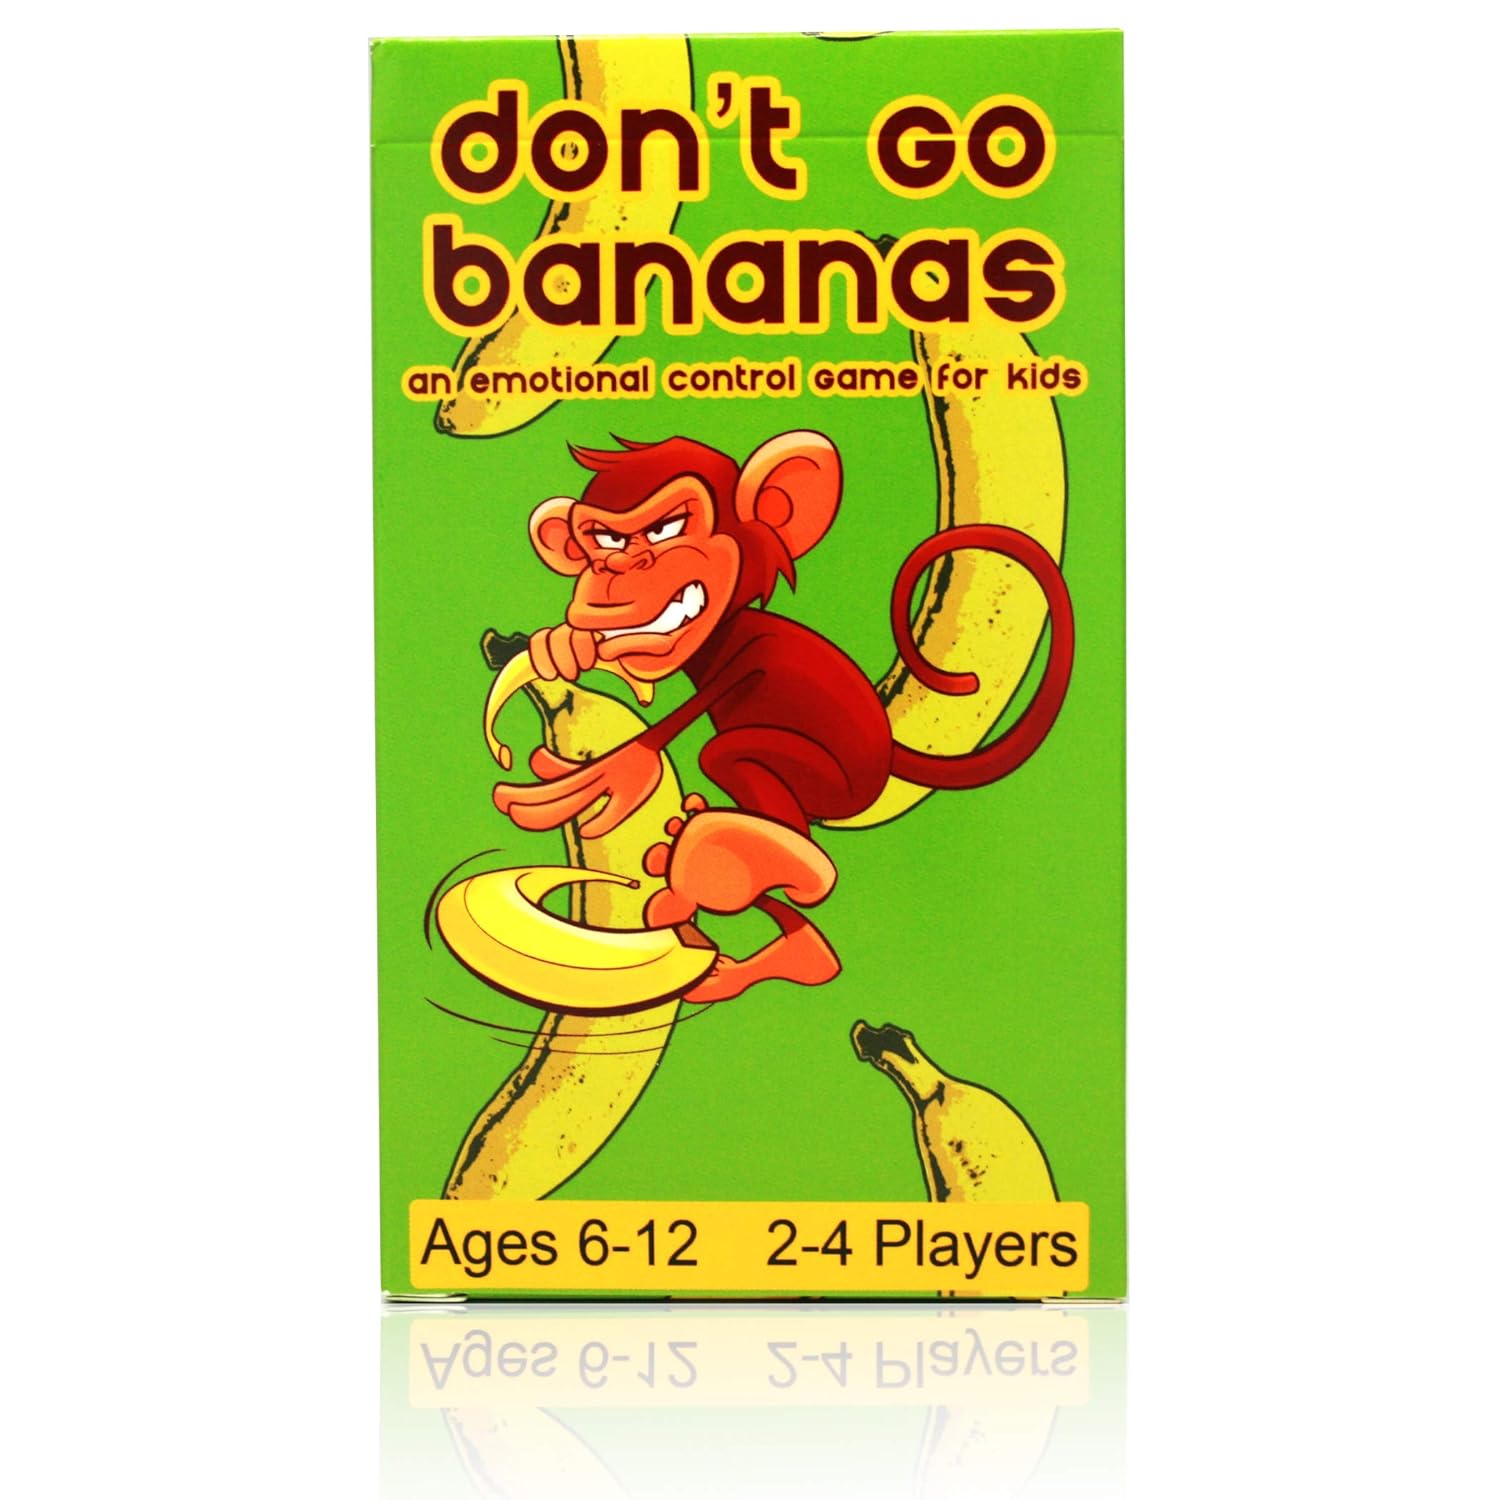 Don't Go Bananas - A CBT Game for Kids to Work on Controlling Strong Emotions